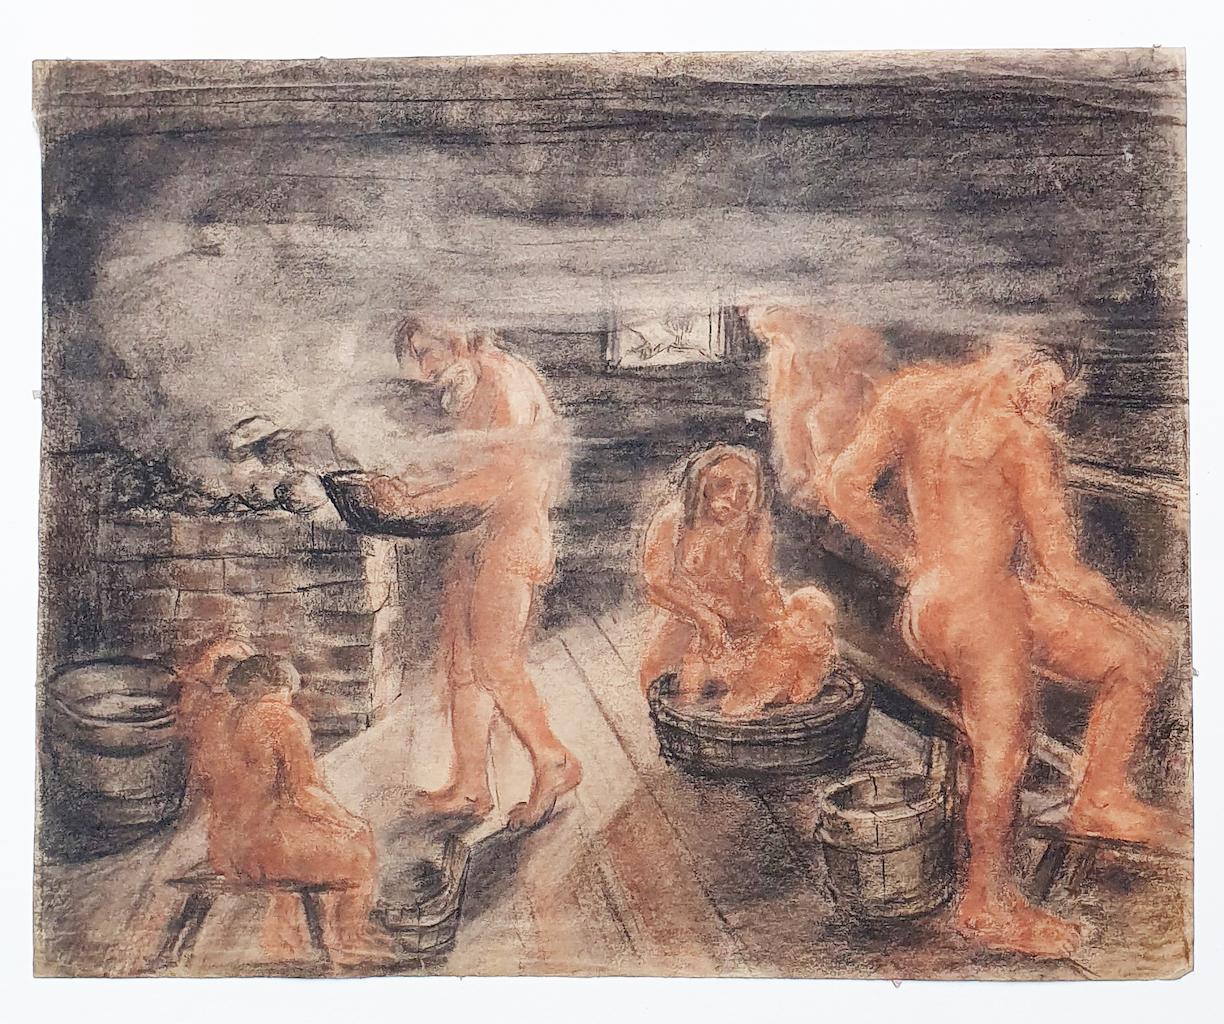 Unknown Figurative Art - Sauna - Drawing in Charcoal e Sanguine on Paper - 20th Century